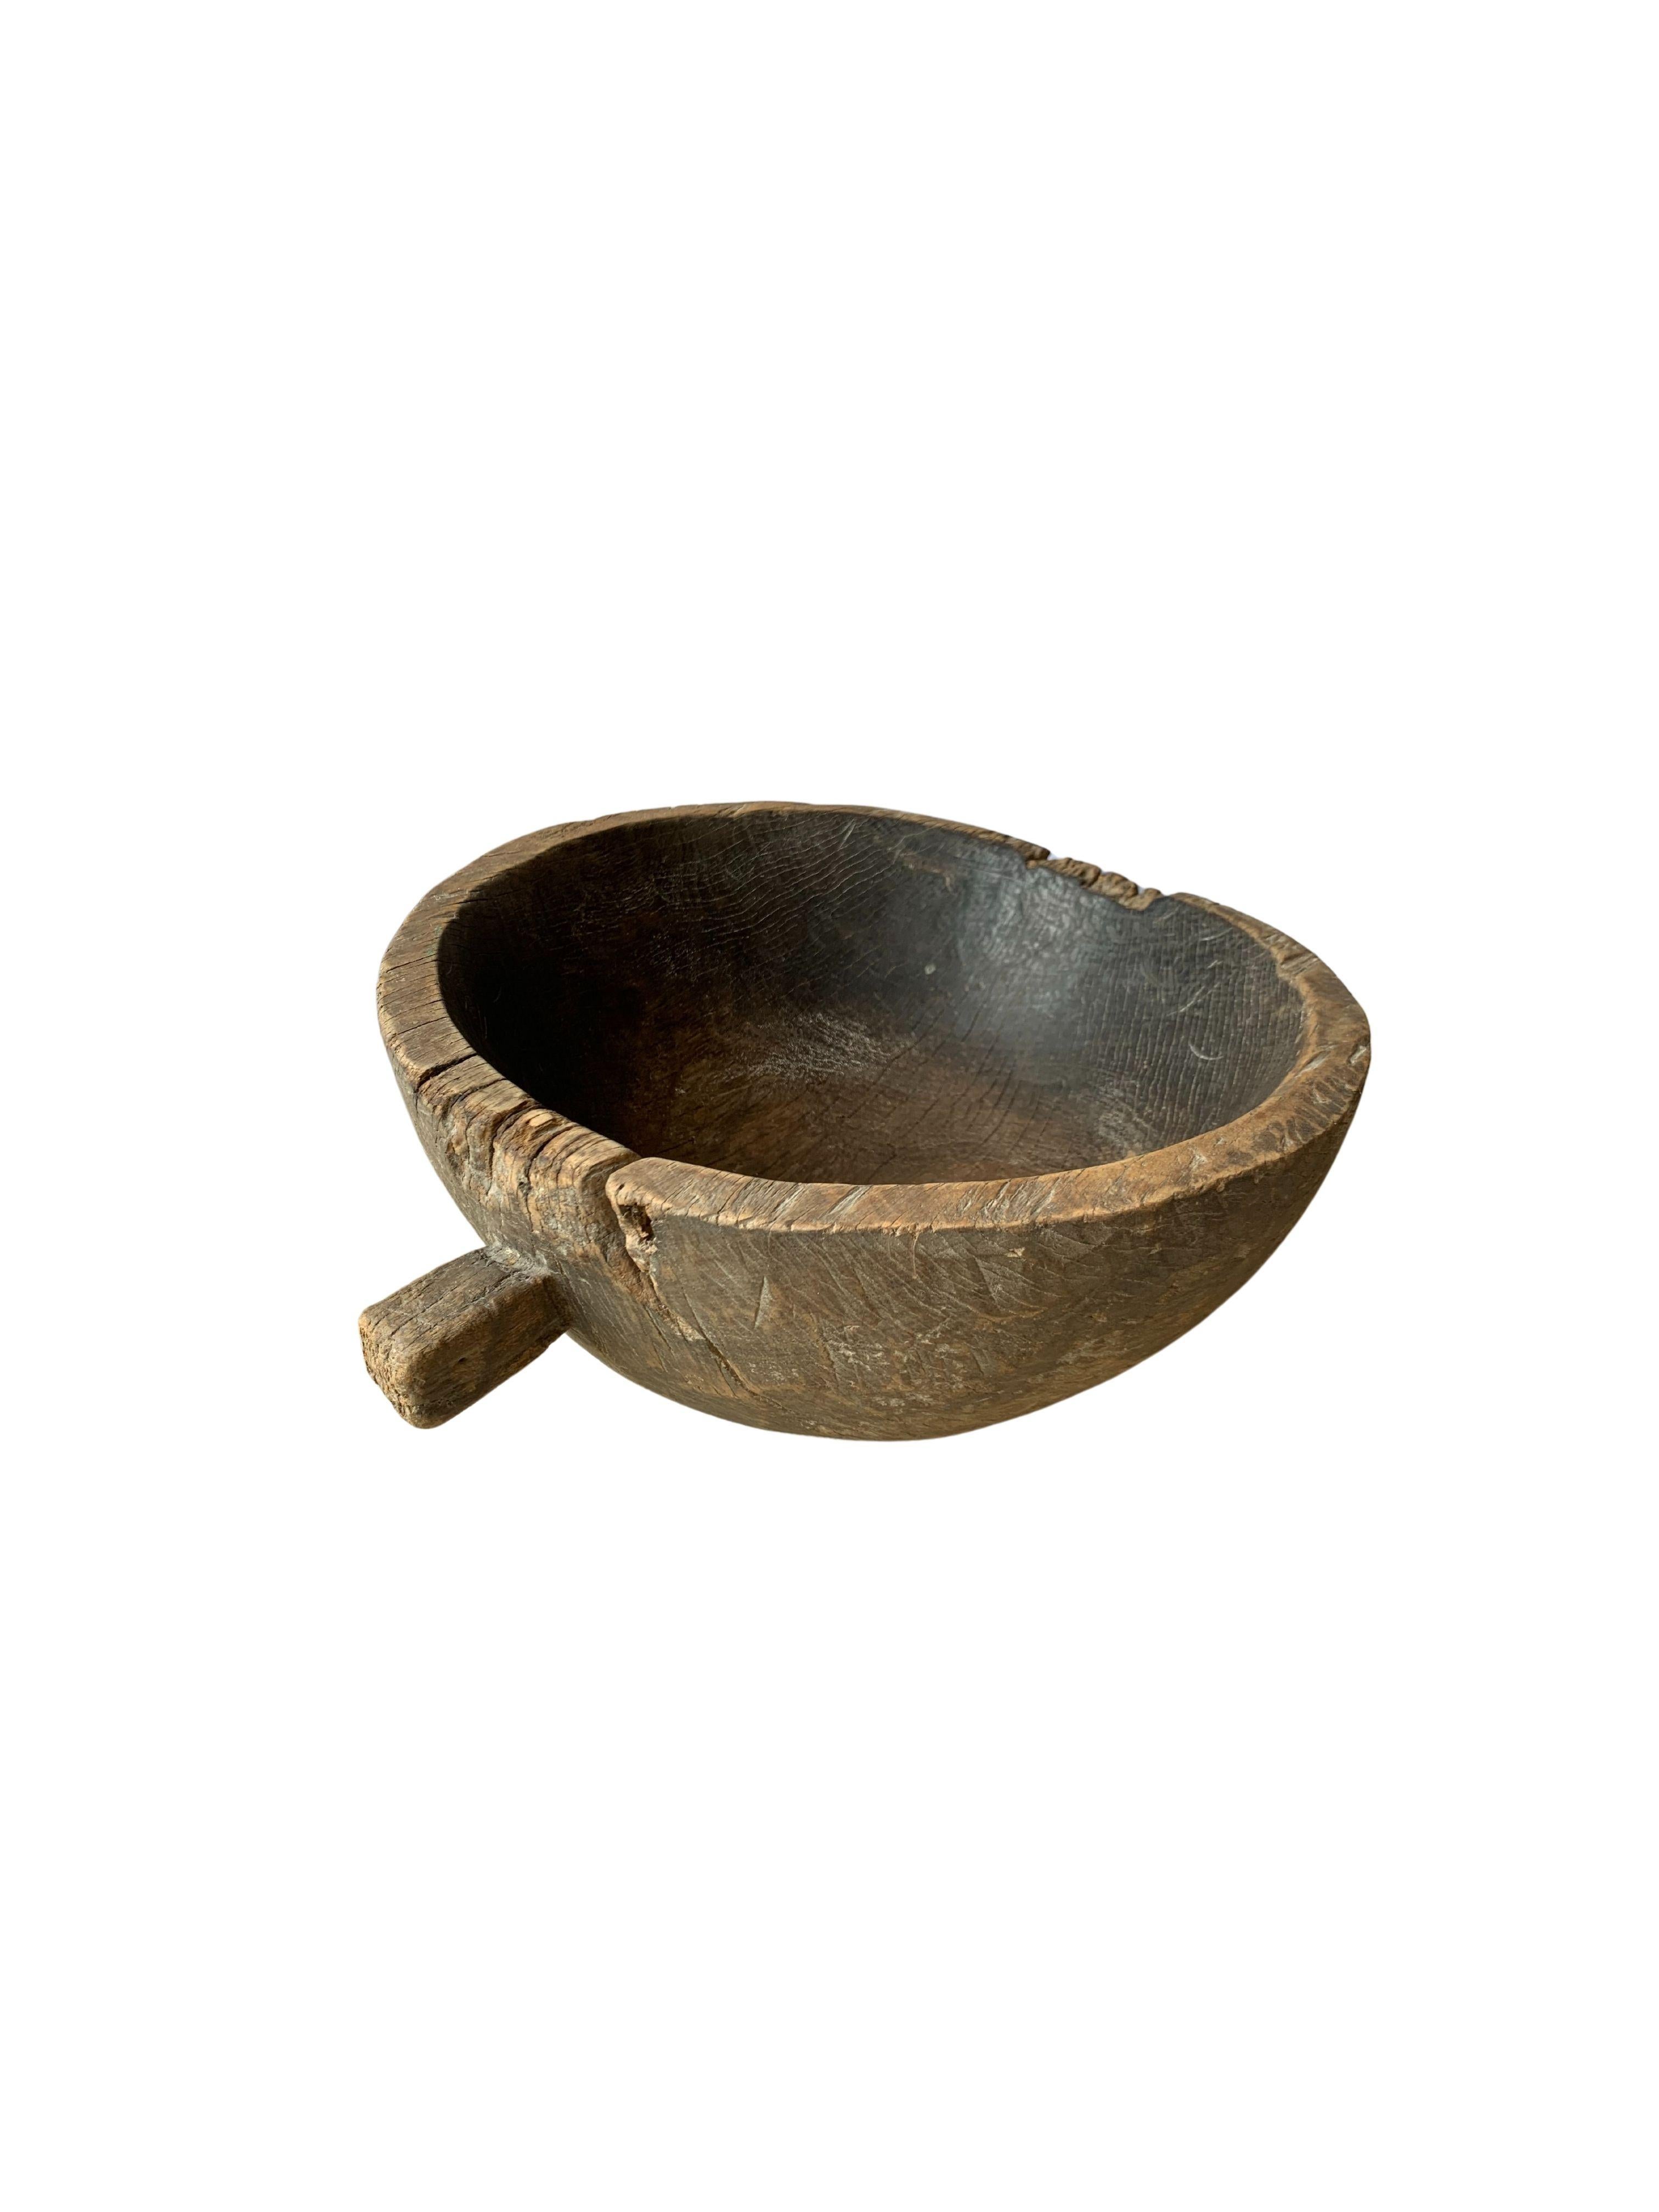 Carved Teak Burl Wood Bowl from Java, Indonesia, Late 19th Century For Sale